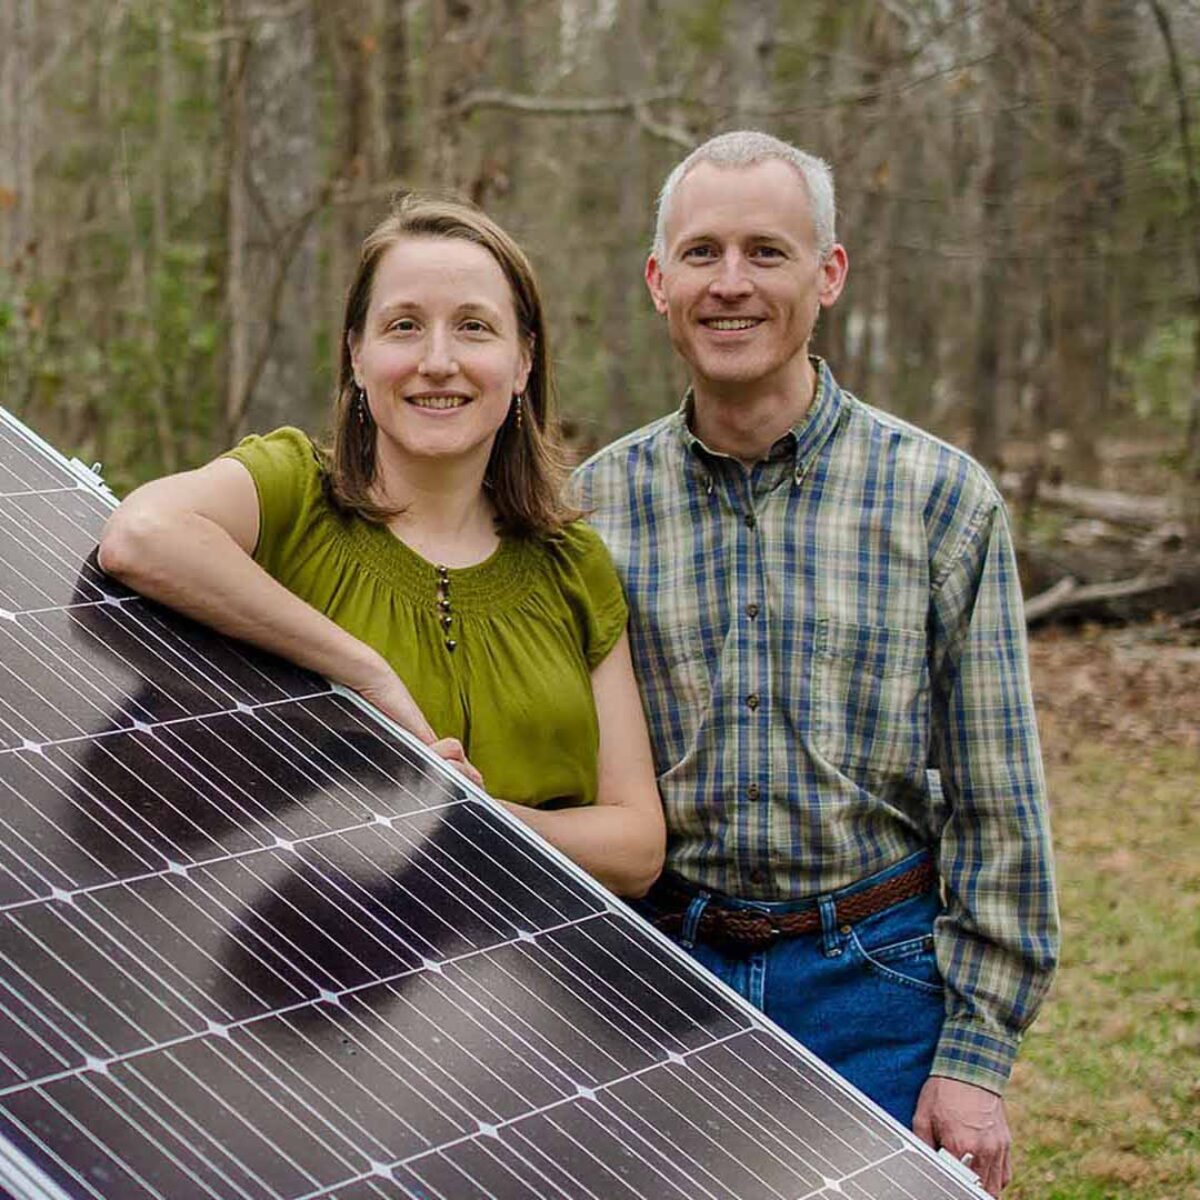 Man and woman leaning on solar panels.